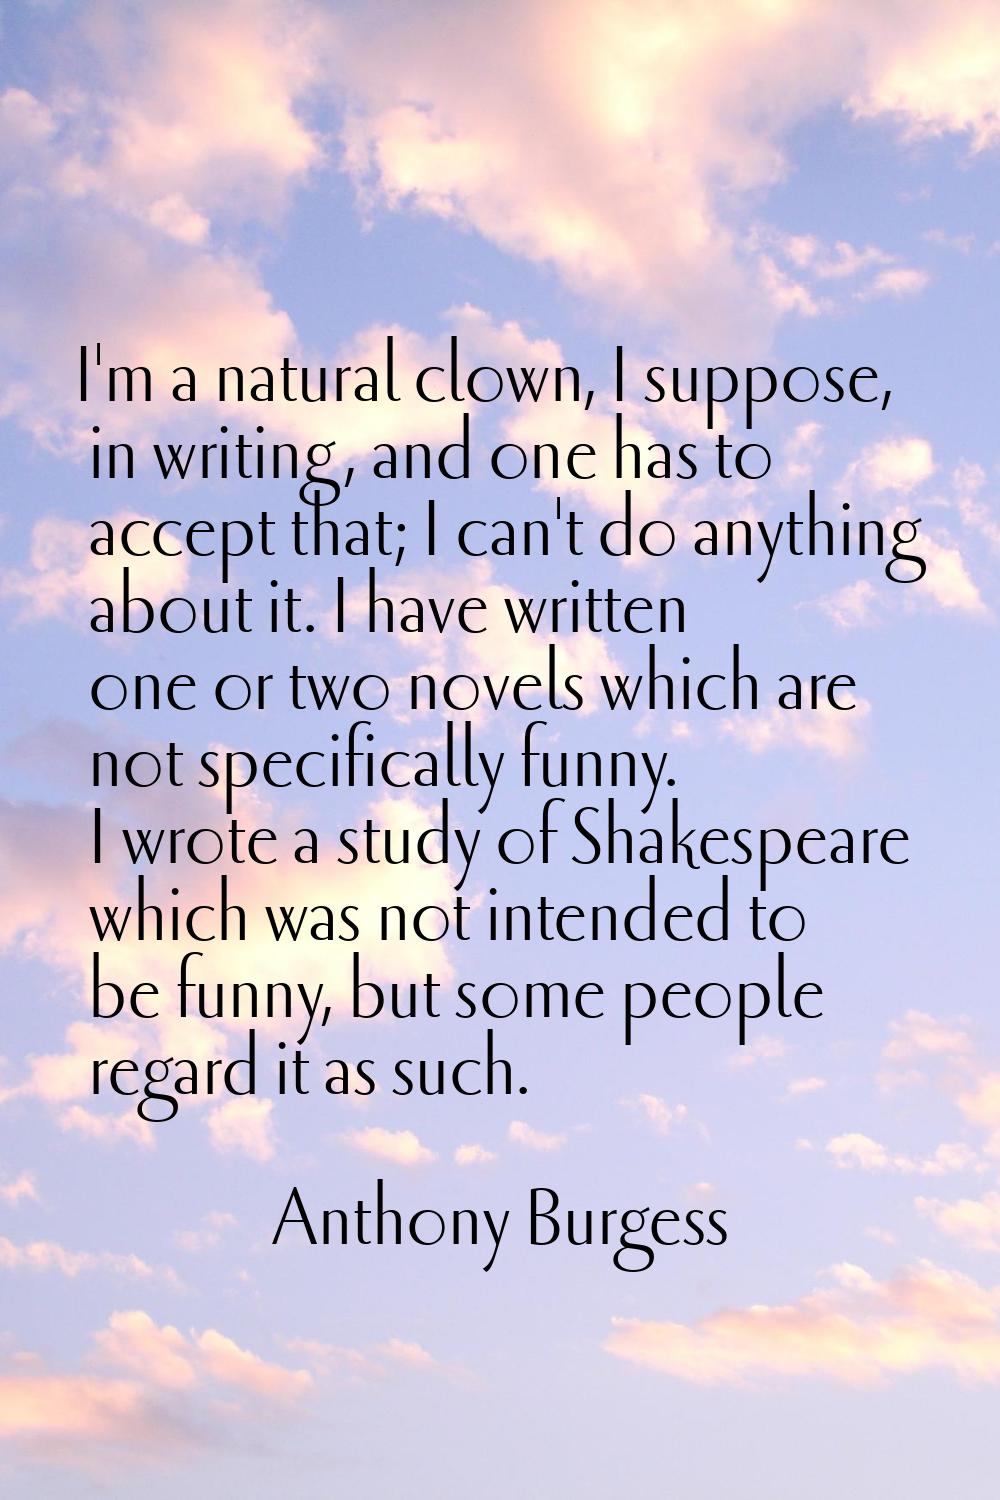 I'm a natural clown, I suppose, in writing, and one has to accept that; I can't do anything about i